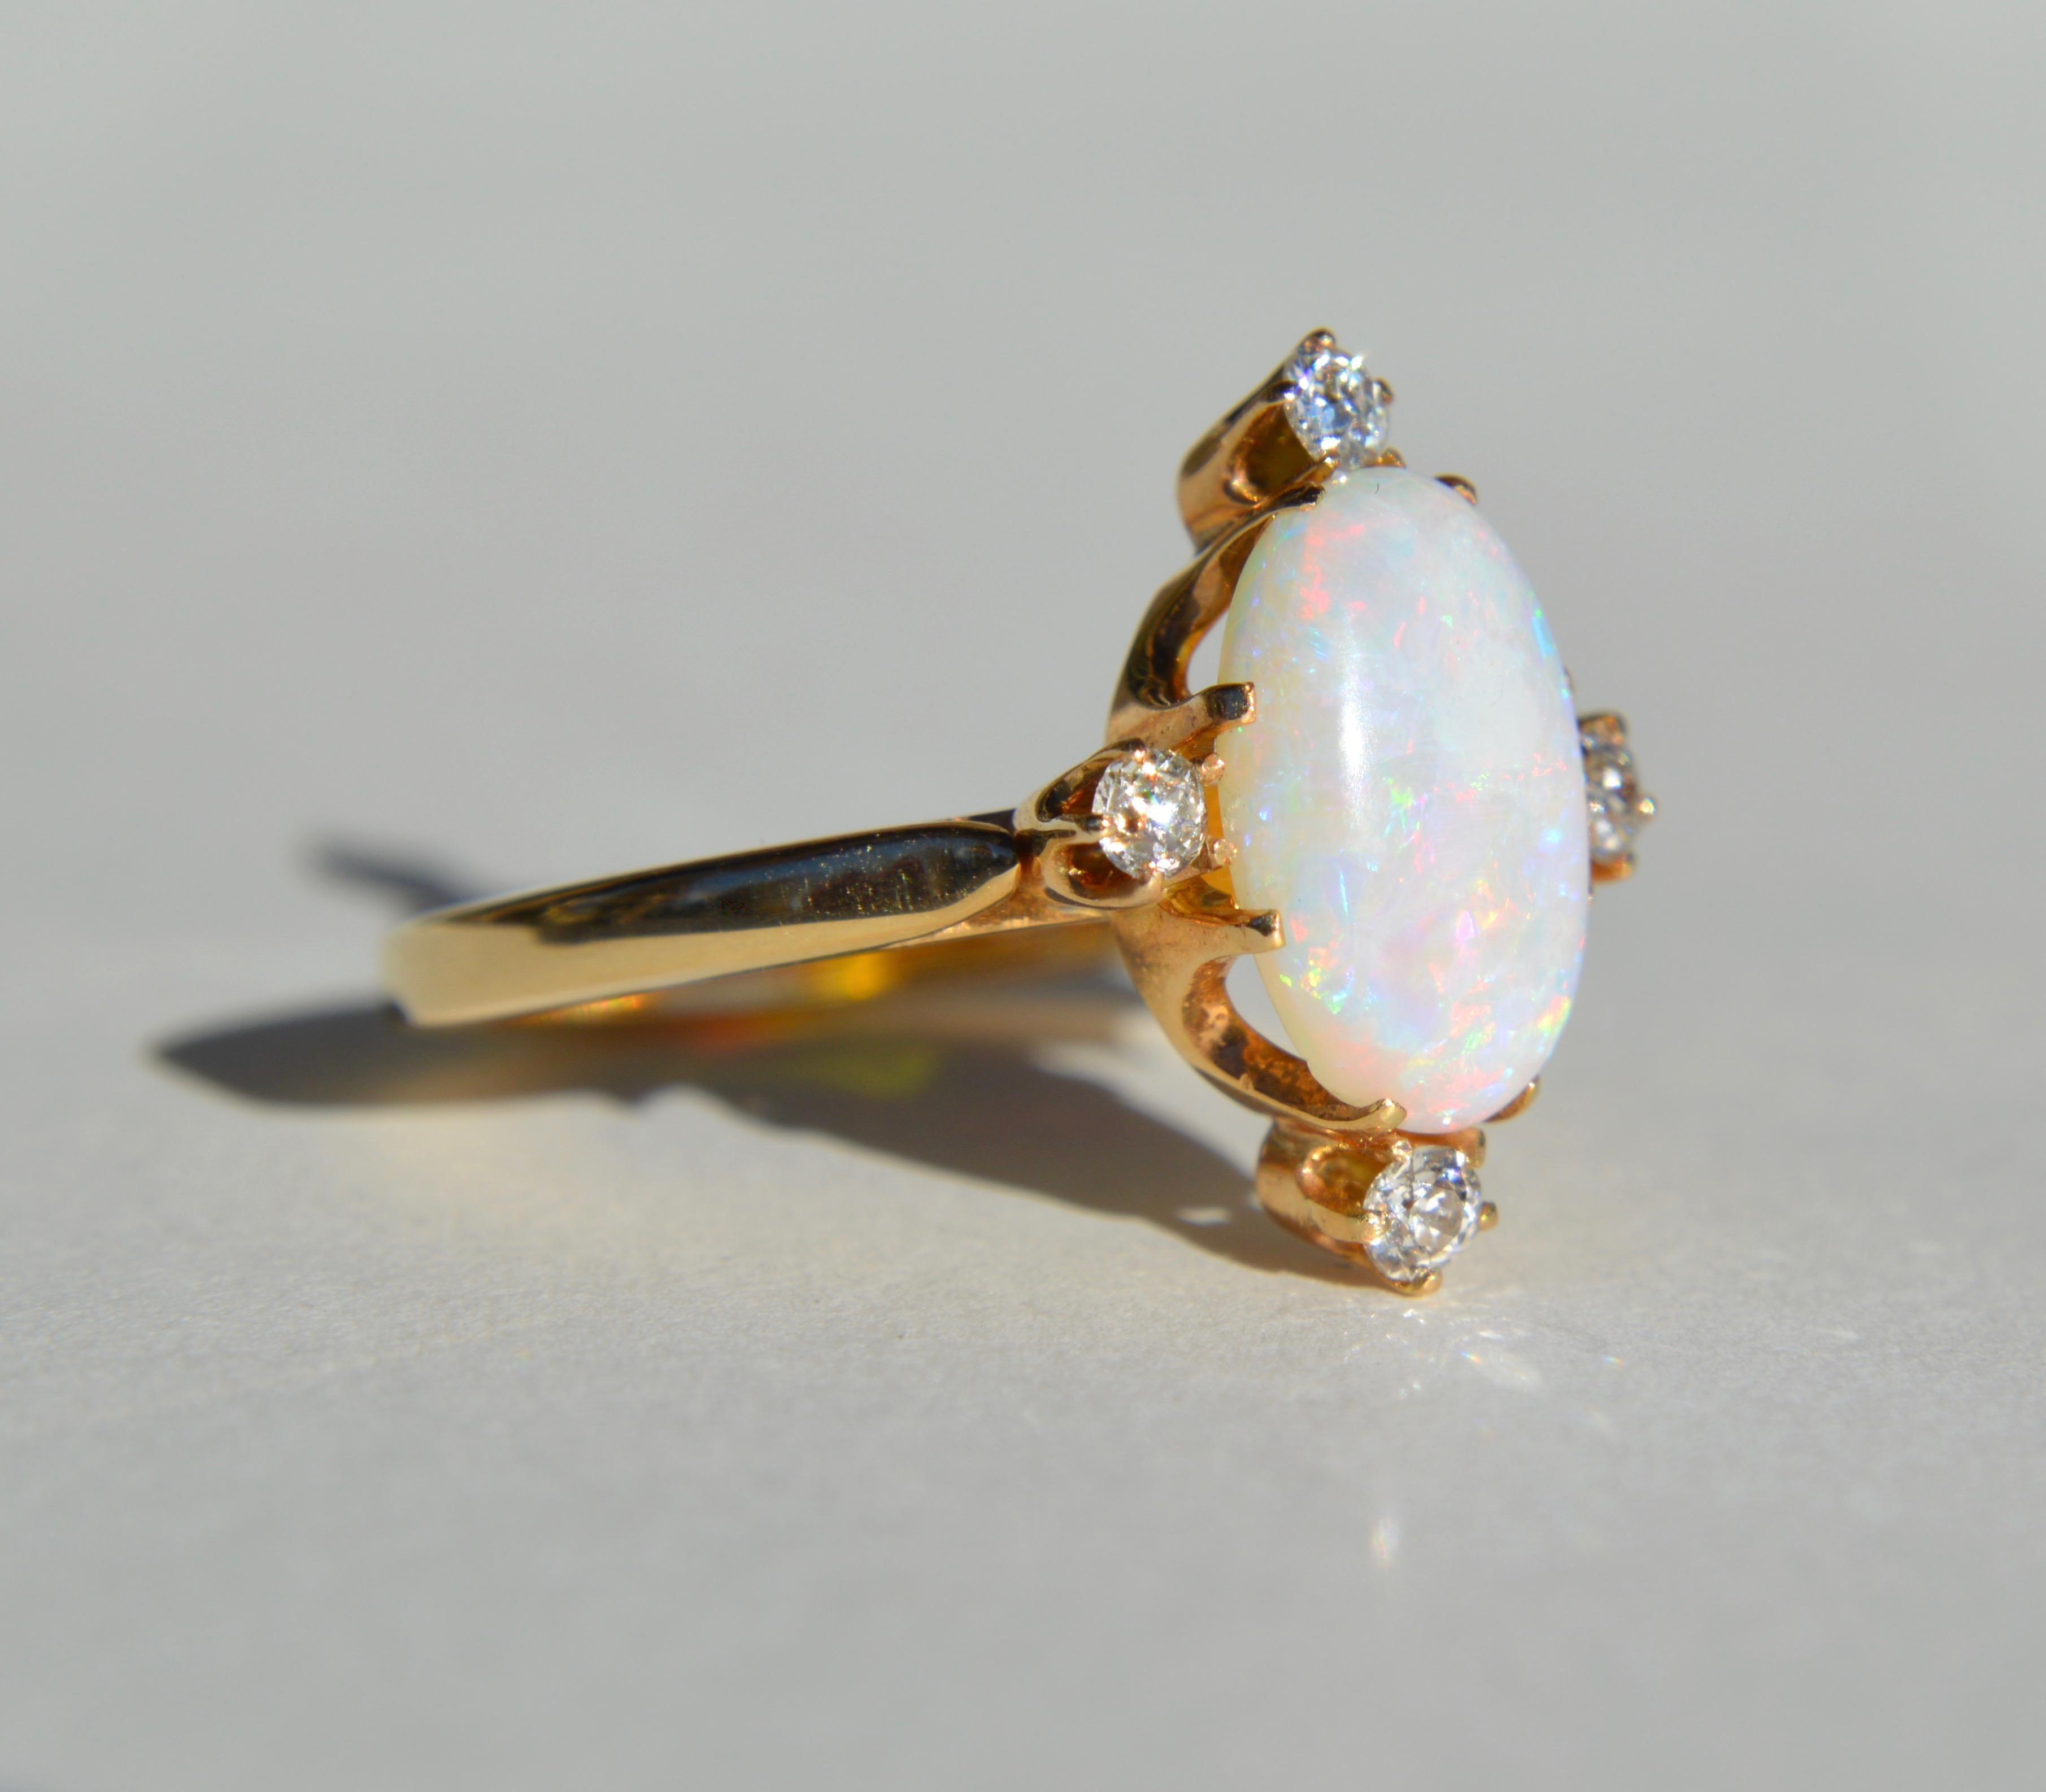 Beautiful vintage circa 1980s 14K yellow gold featuring a 3 carat fiery rainbow flecked Australian opal cabochon with 4 round cut diamonds, each .11 carat (3mm diameter).  In very good condition. Ring is unmarked but acid tested as solid 14K gold.